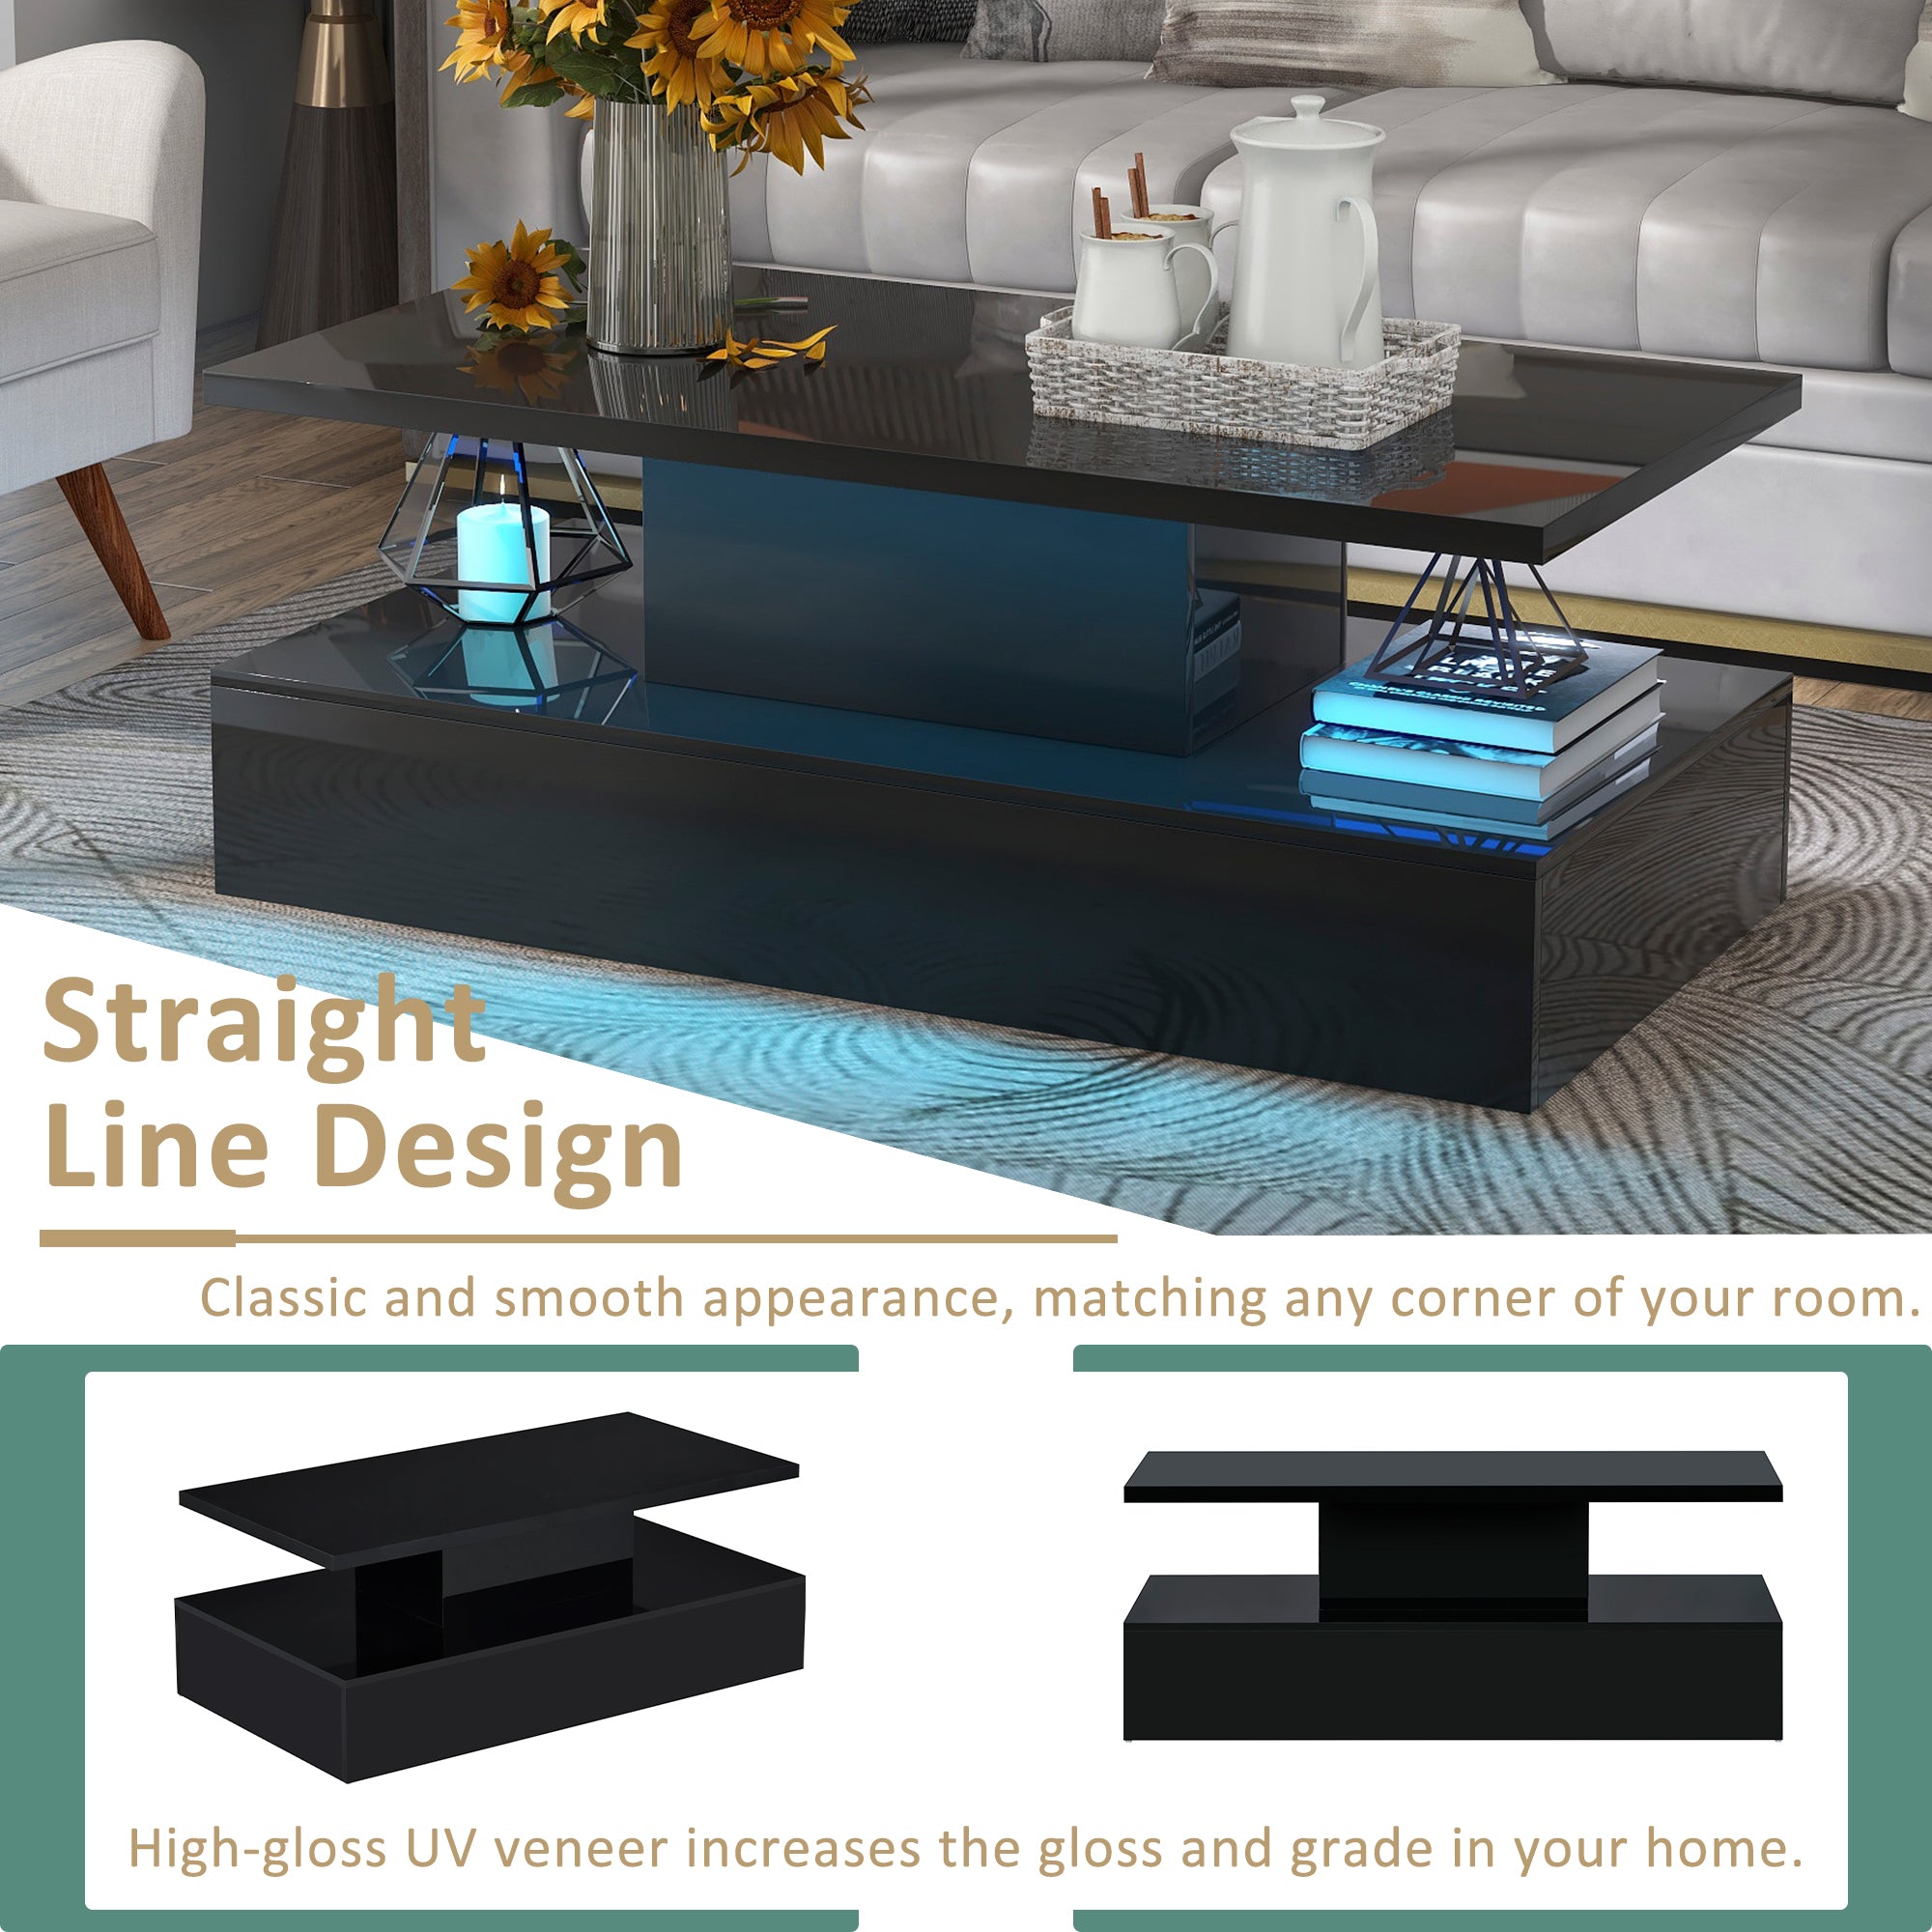 ON TREND Coffee Table Cocktail Table Modern Industrial black-particle board